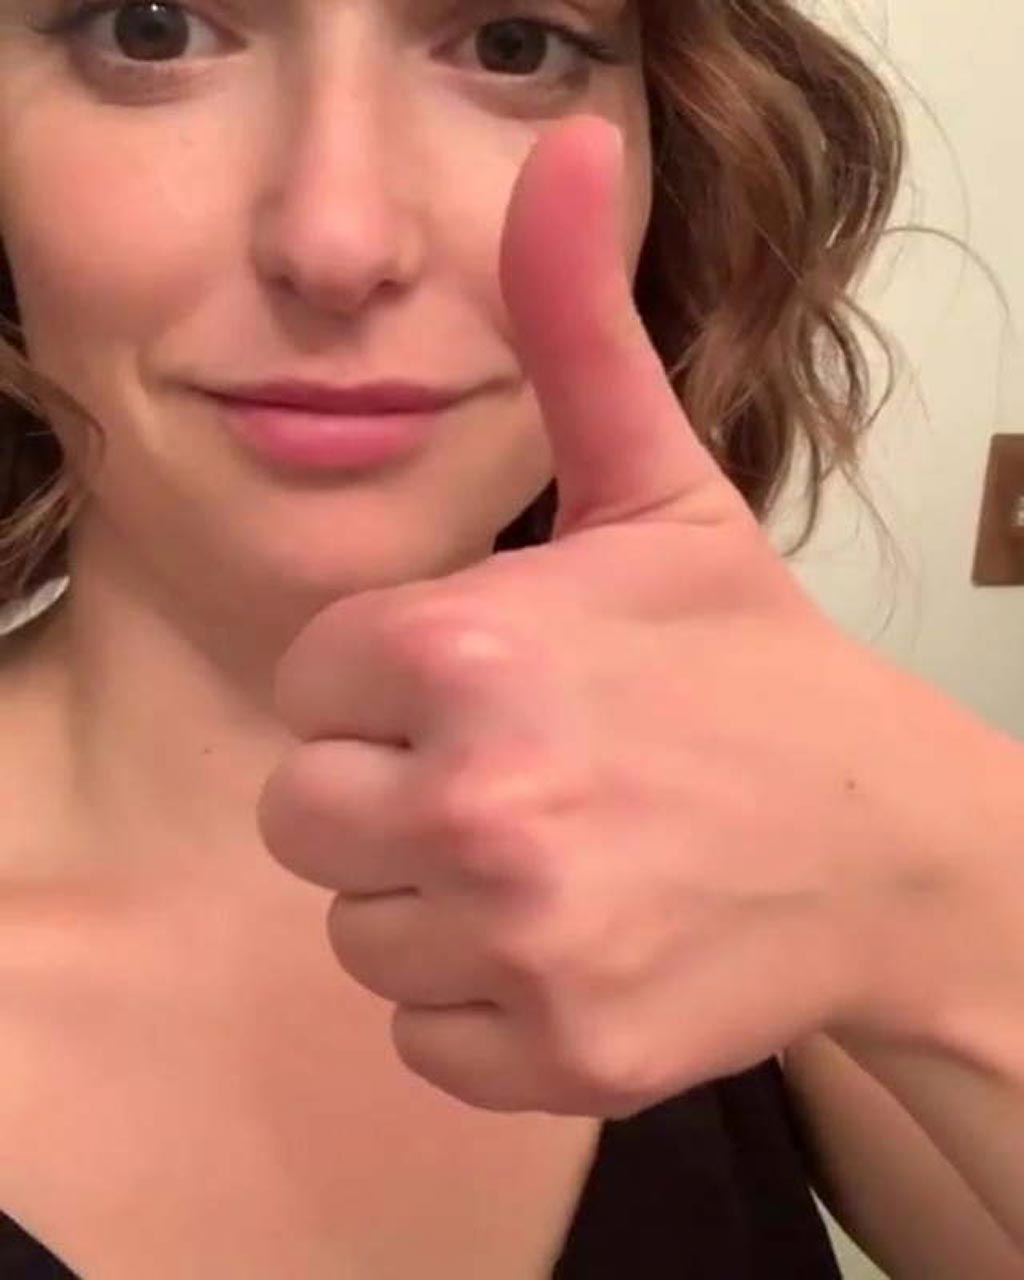 Milana Vayntrub Nude and Private Leaked Pics.